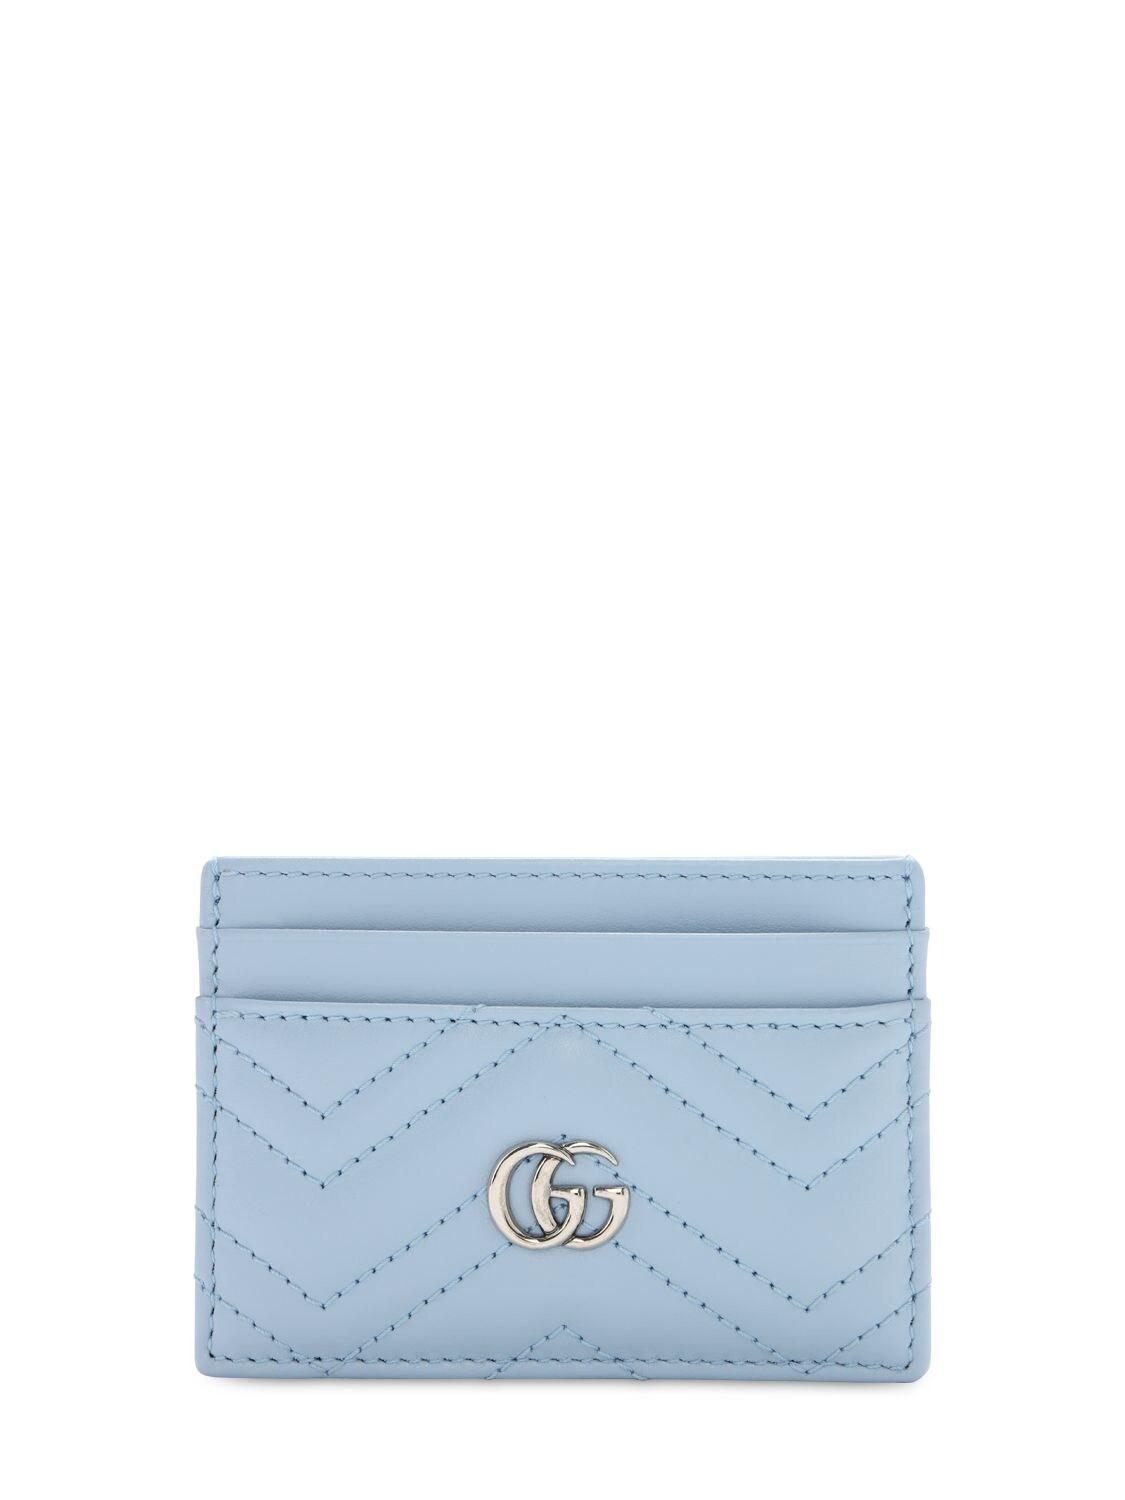 GG Marmont Card Case in Light Blue 